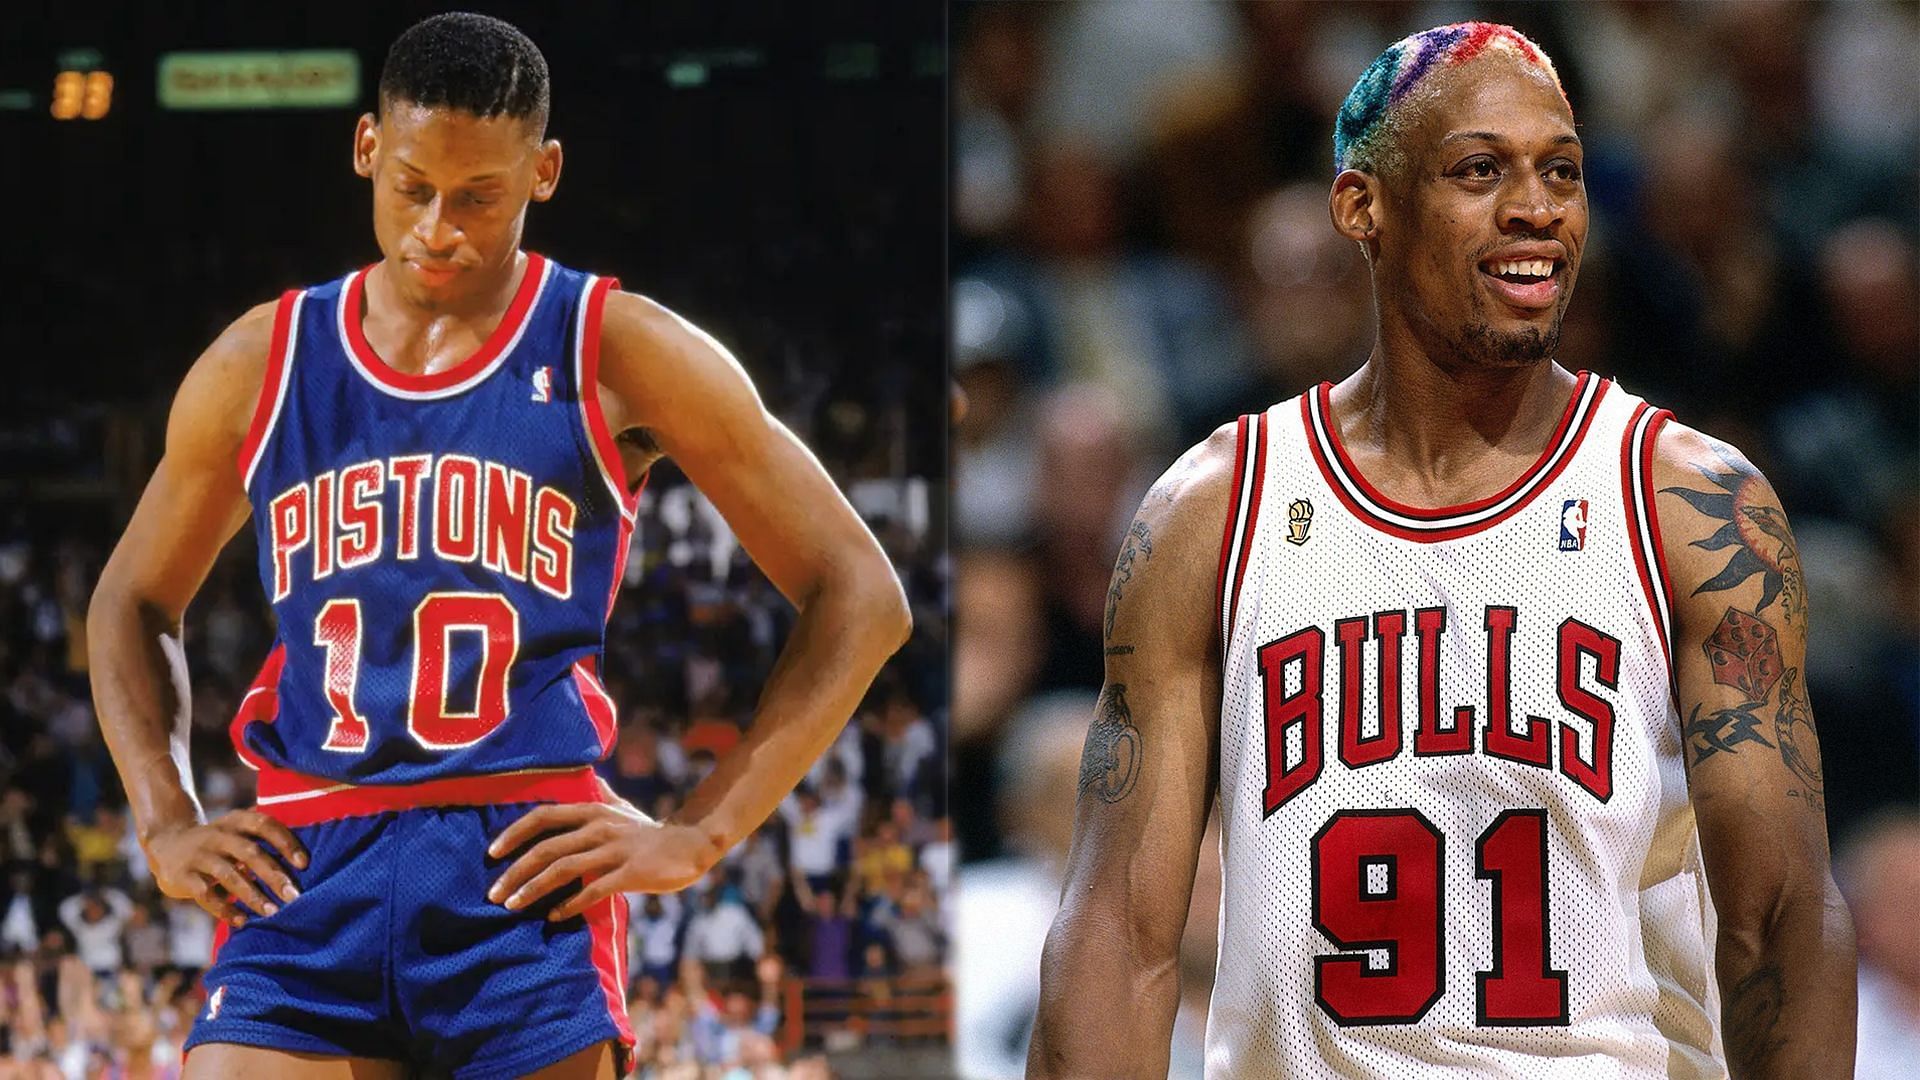 Rodman is among the most controversial NBA players of all time